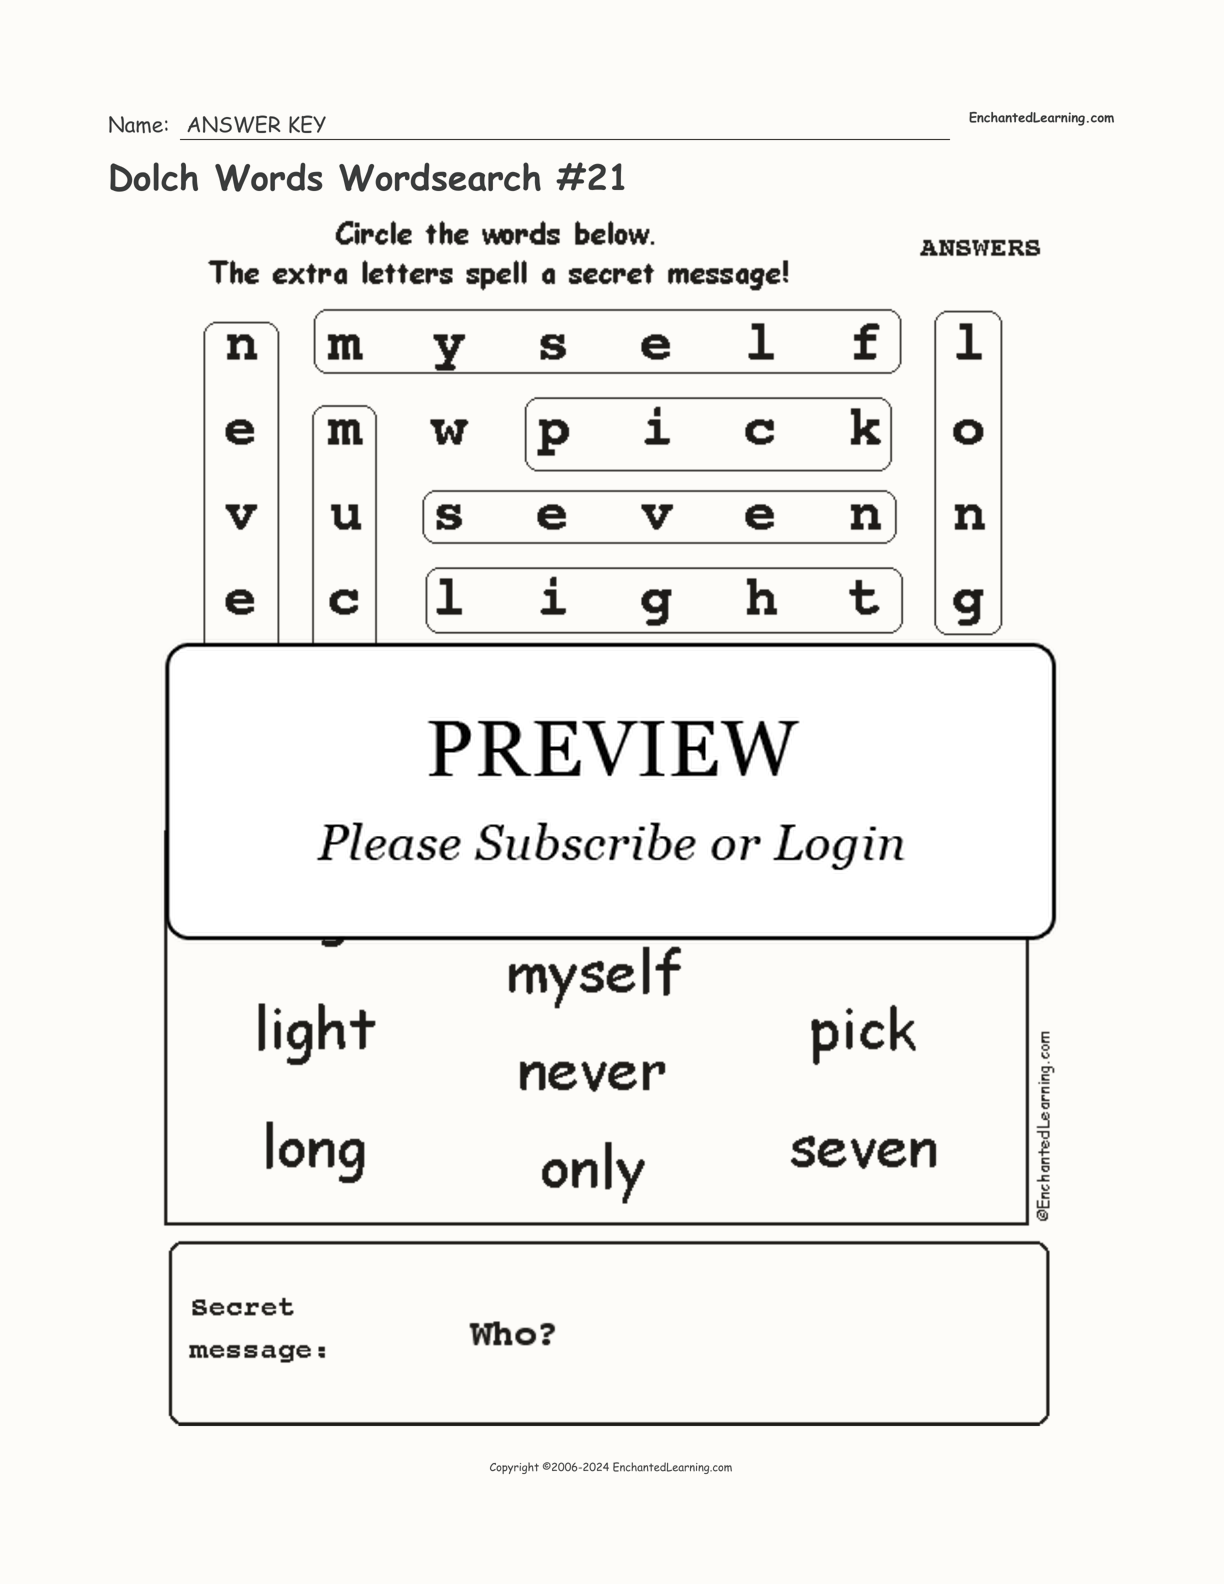 Dolch Words Wordsearch #21 interactive worksheet page 2